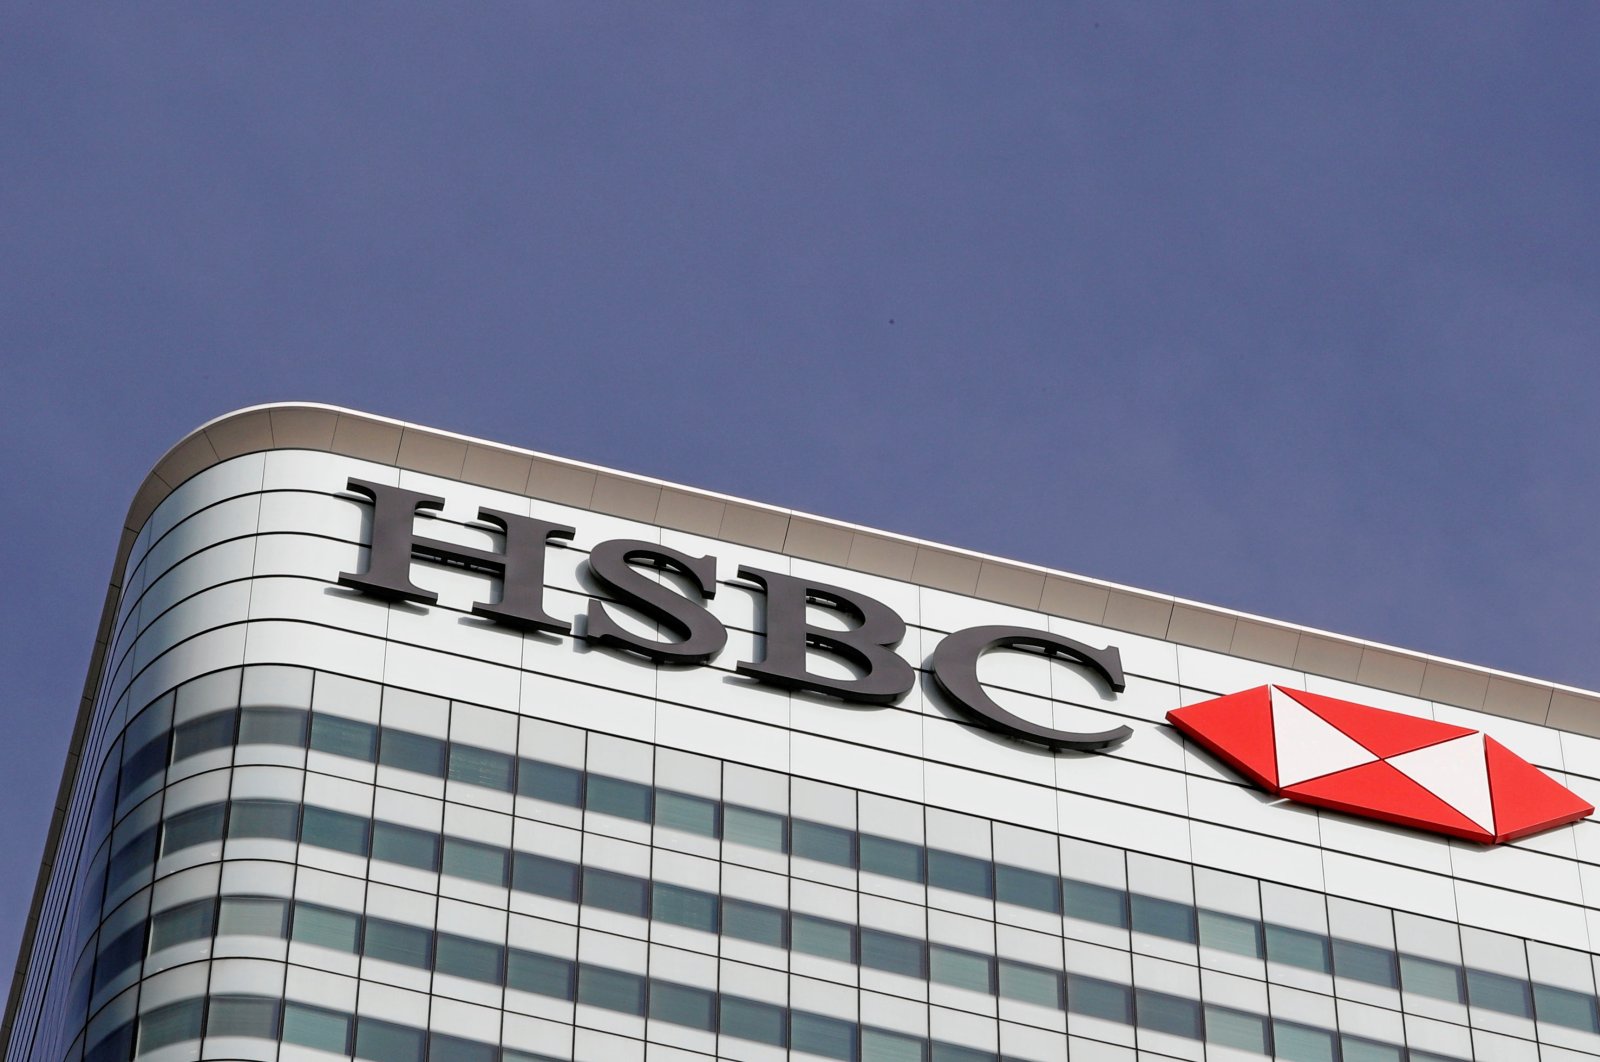 The HSBC bank logo is seen in the Canary Wharf financial district in London, Britain, March 3, 2016. (Photo by Reuters)